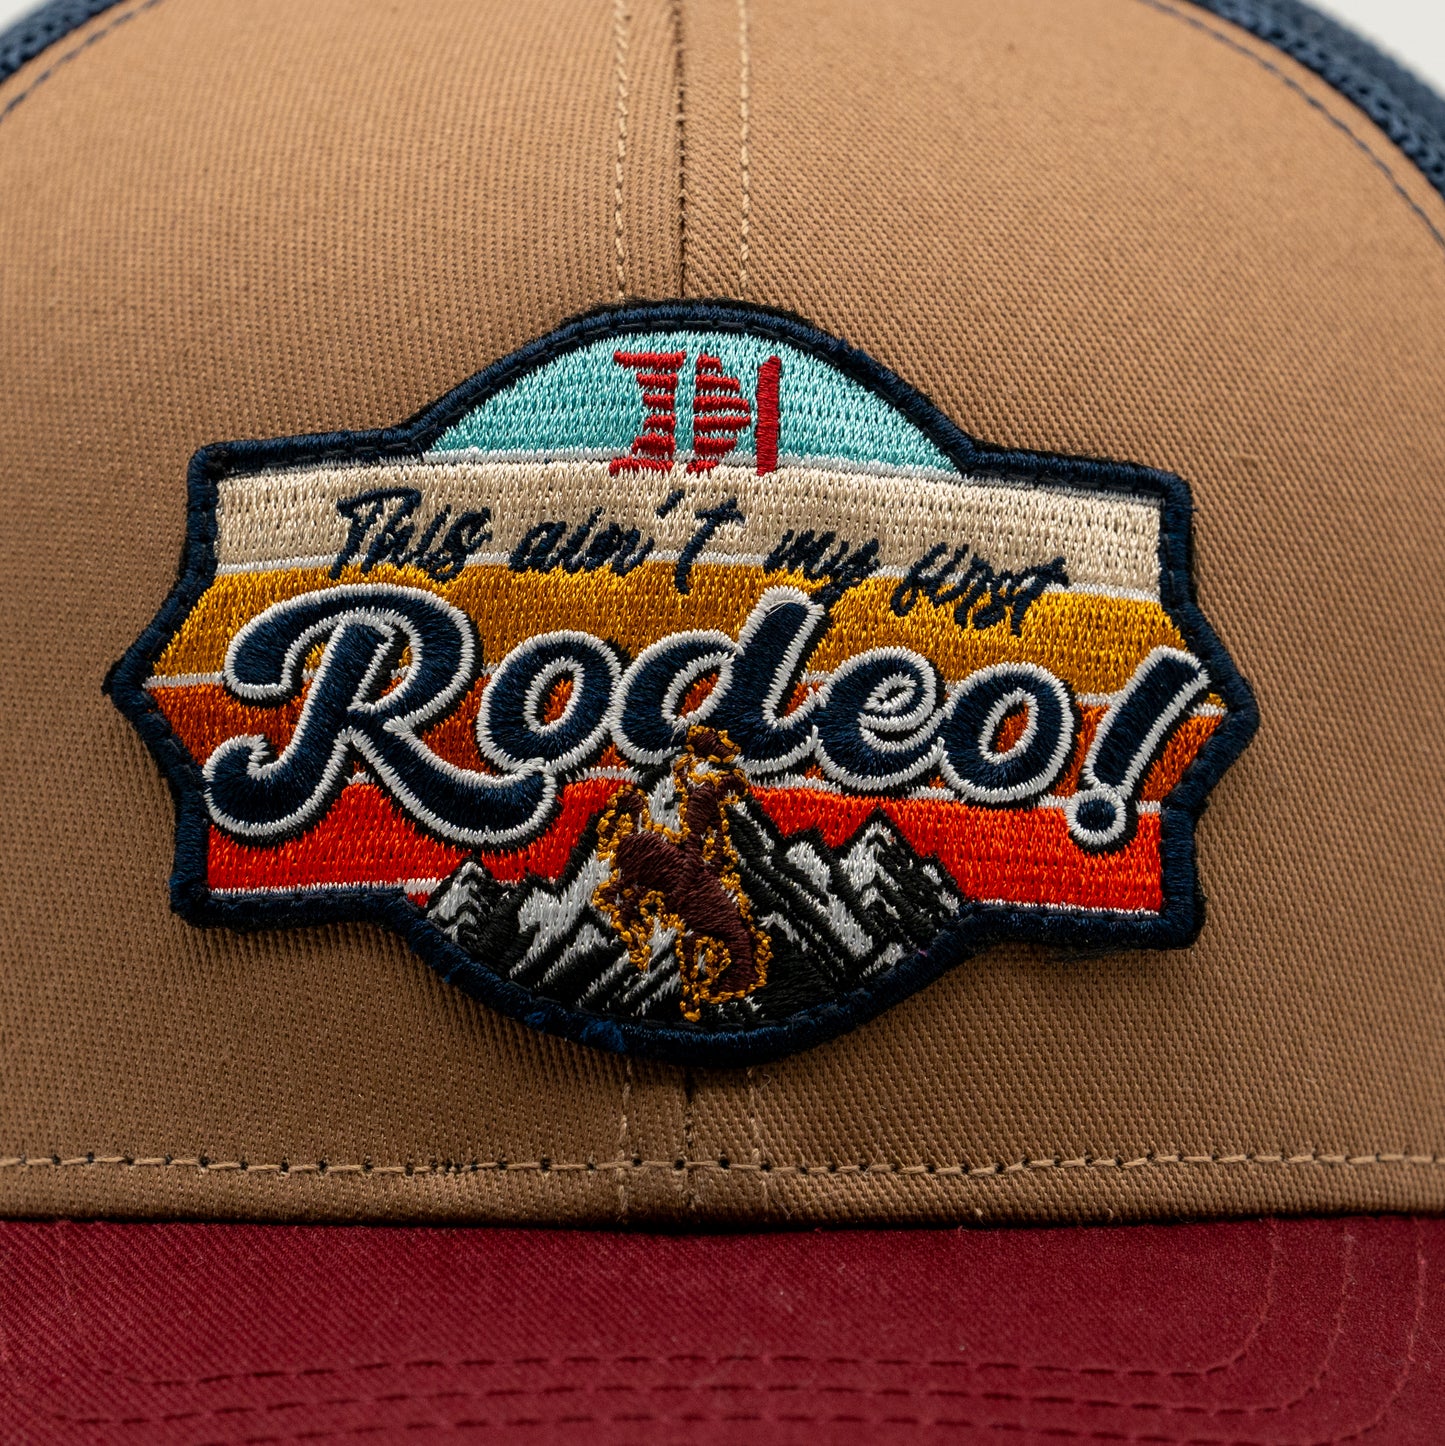 Rodeo 3 color Snapback Curved Brim